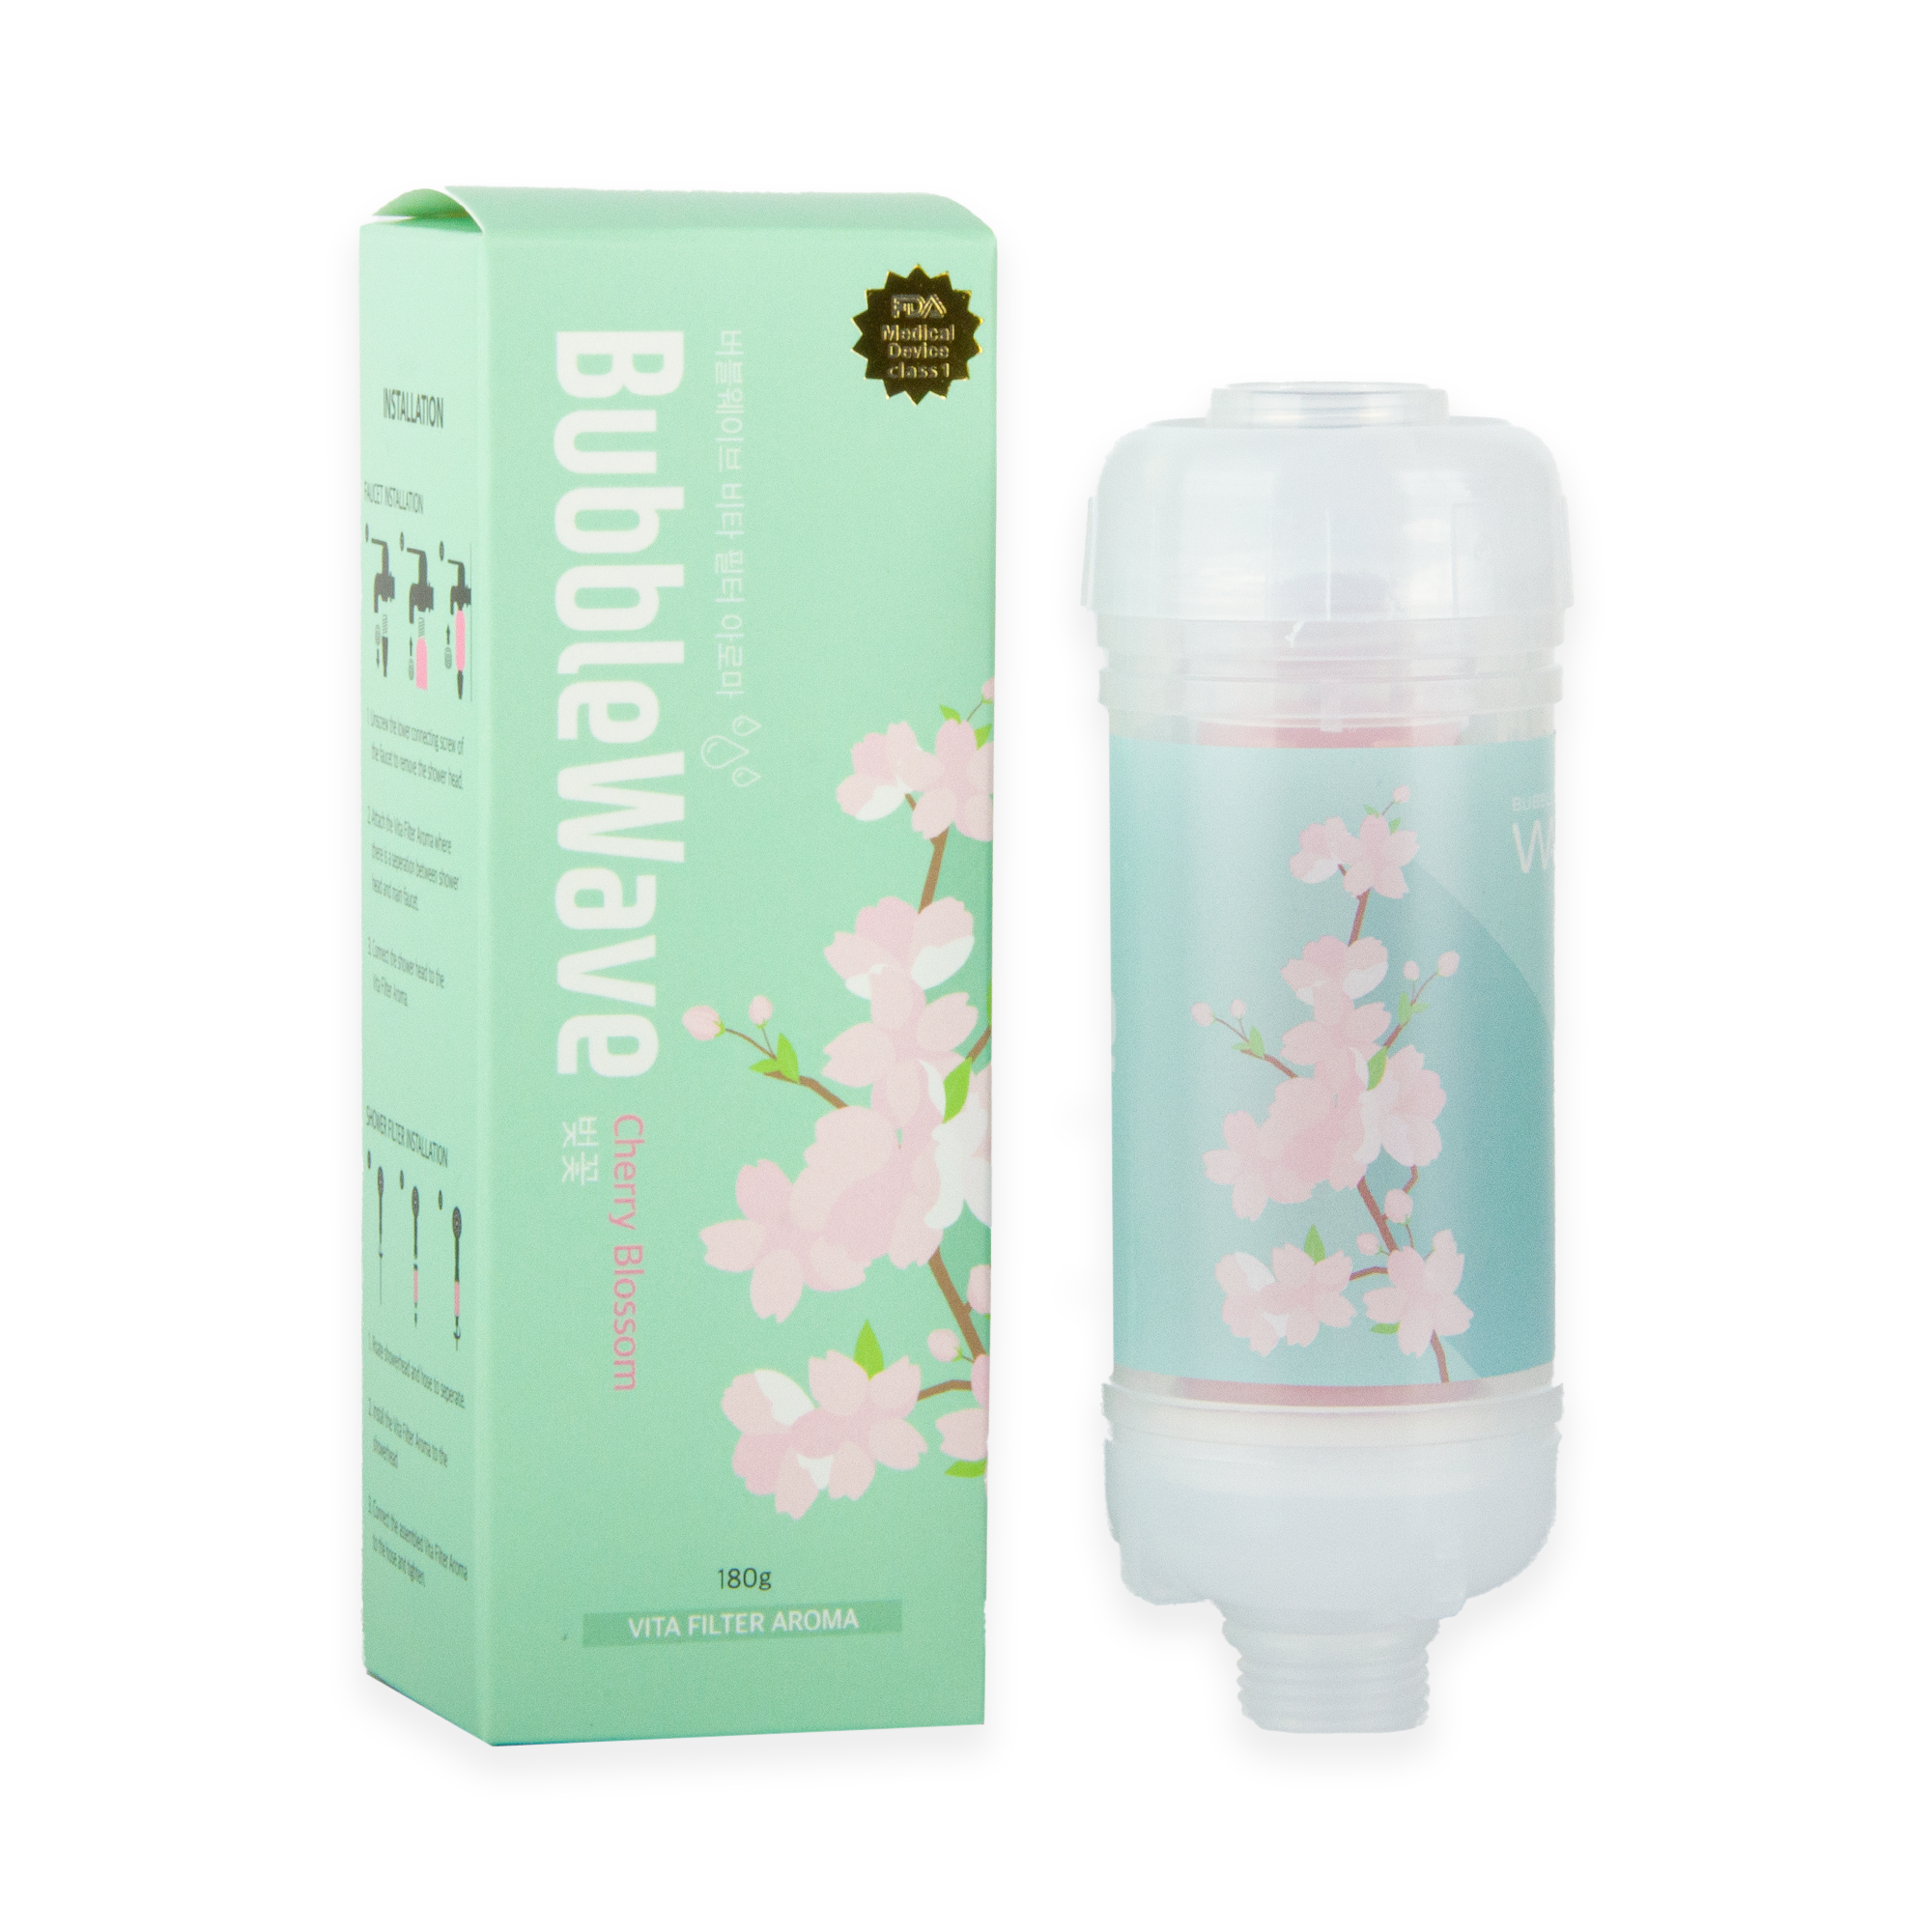 BUBBLEWAVE Vitamin C Aroma Shower Filter  12 Scents of Aroma